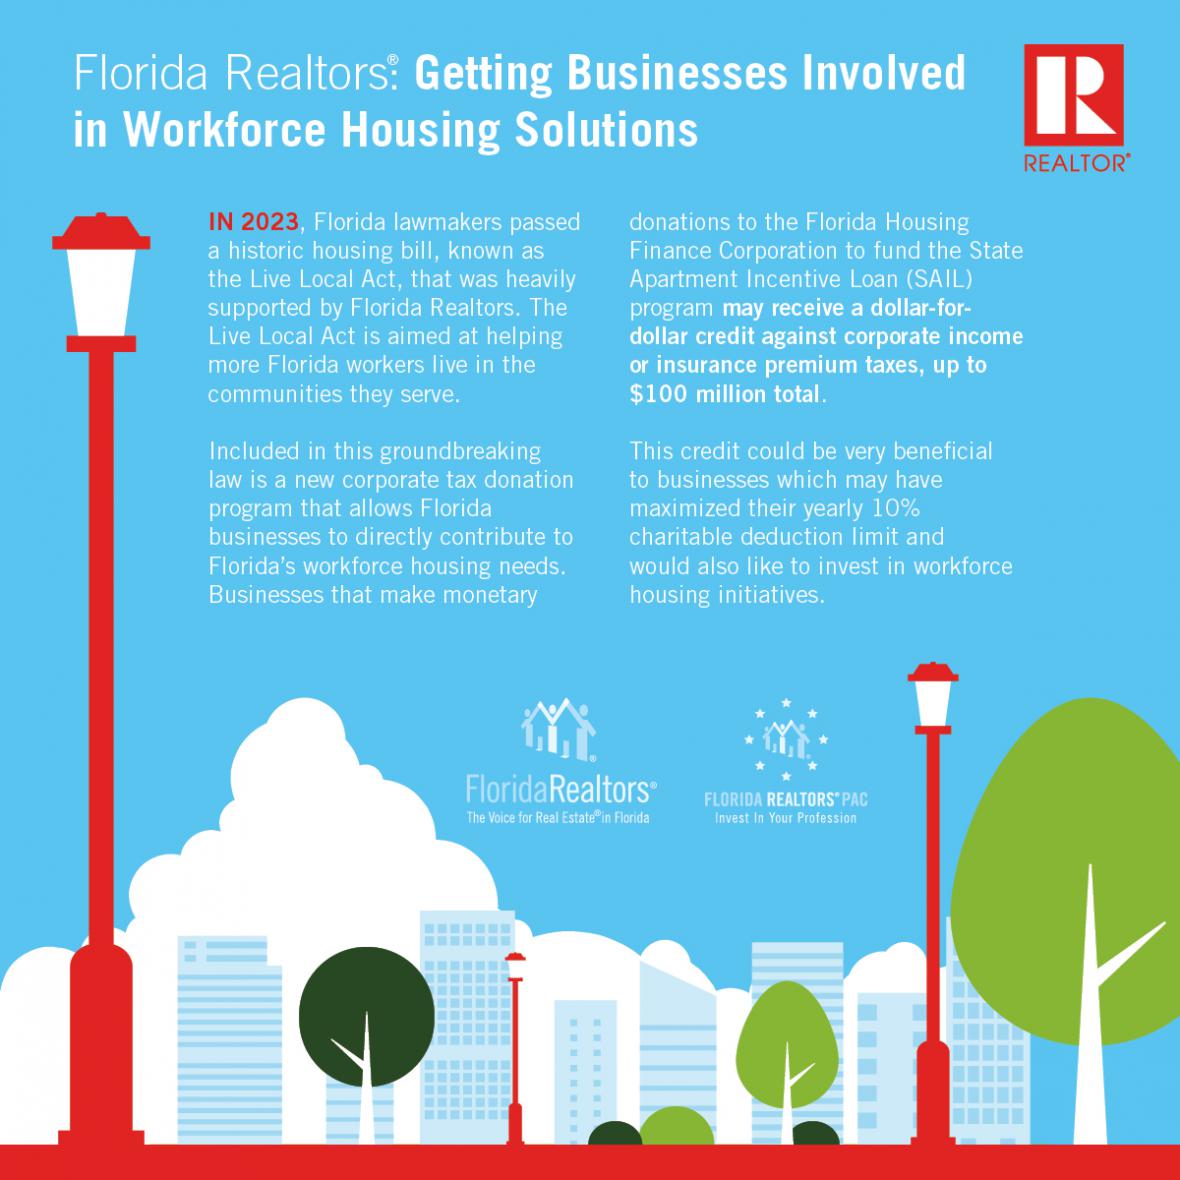 Florida Realtors Getting Businesses involved in workforce housing infographic